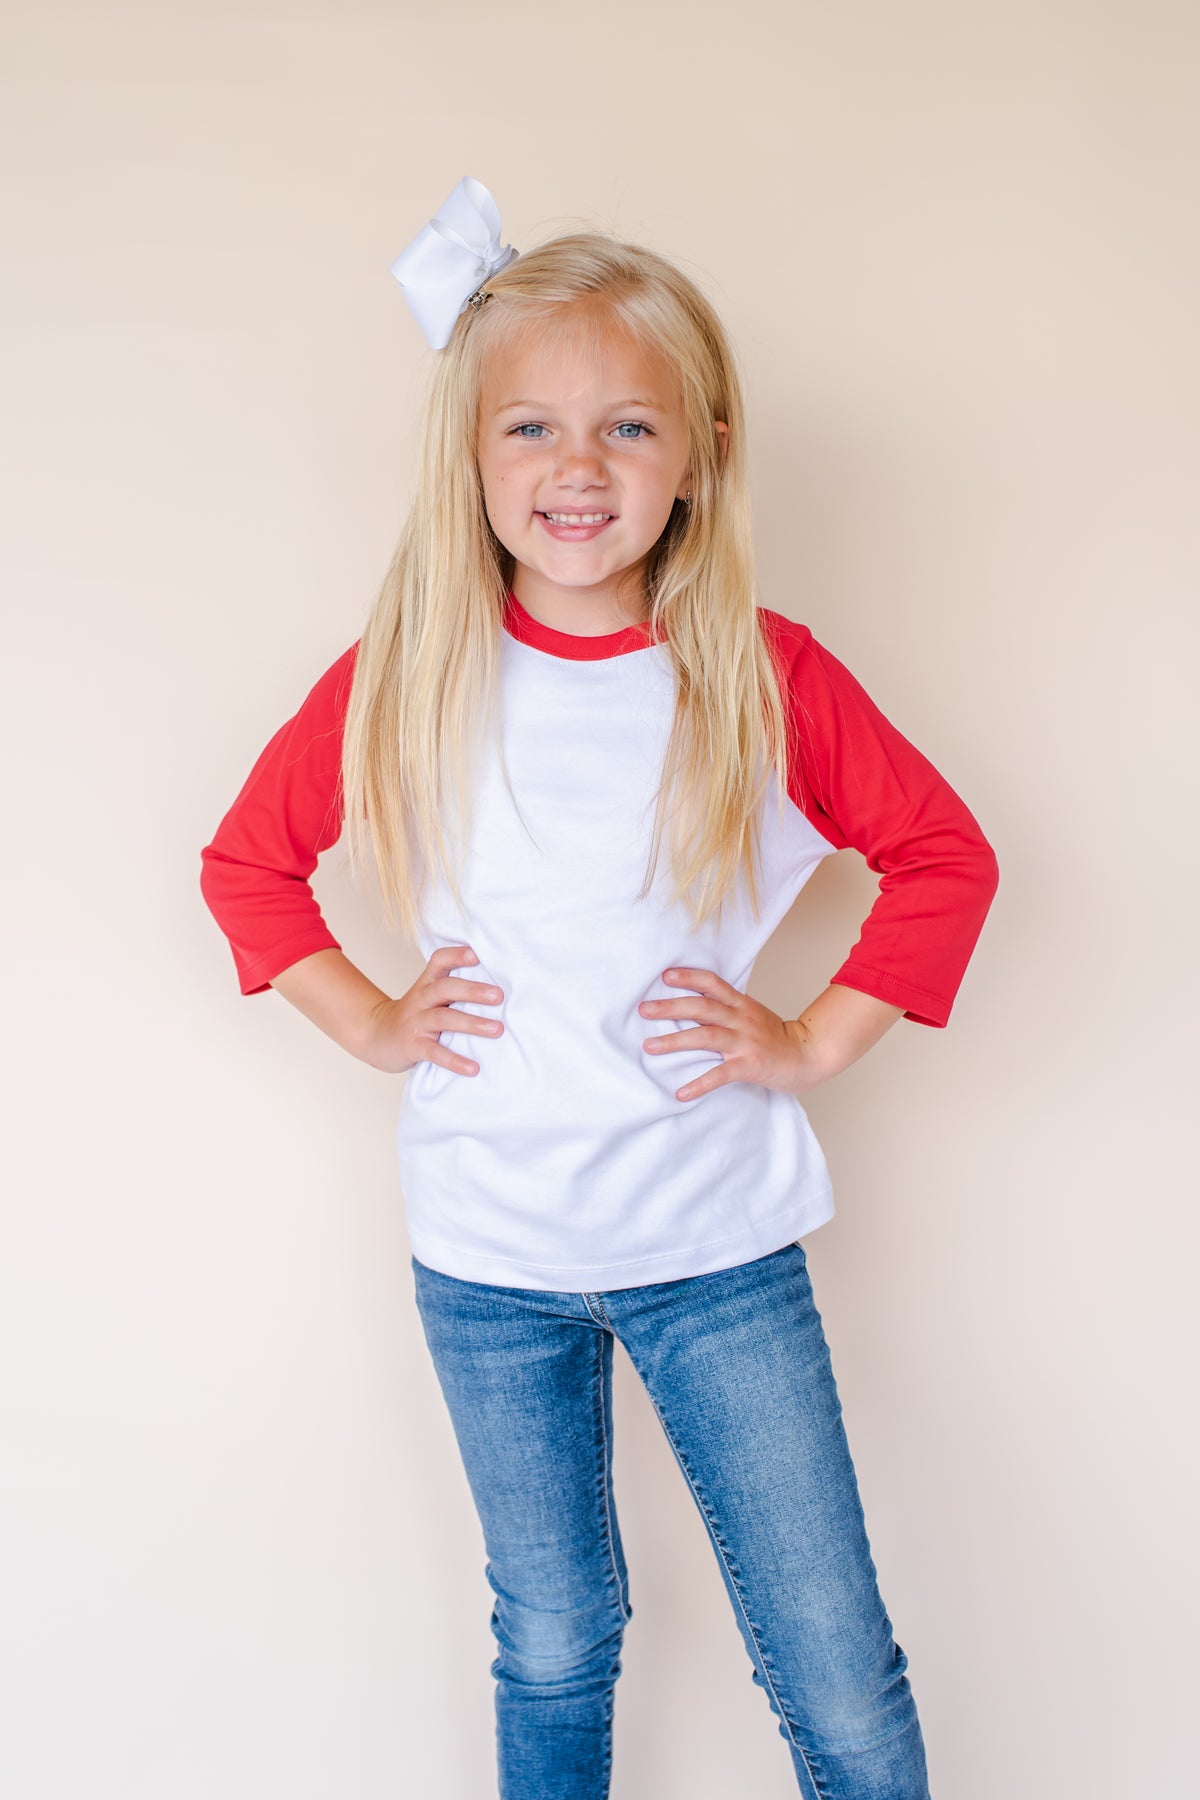 Unisex Raglan Shirt with White Body (Youth) by